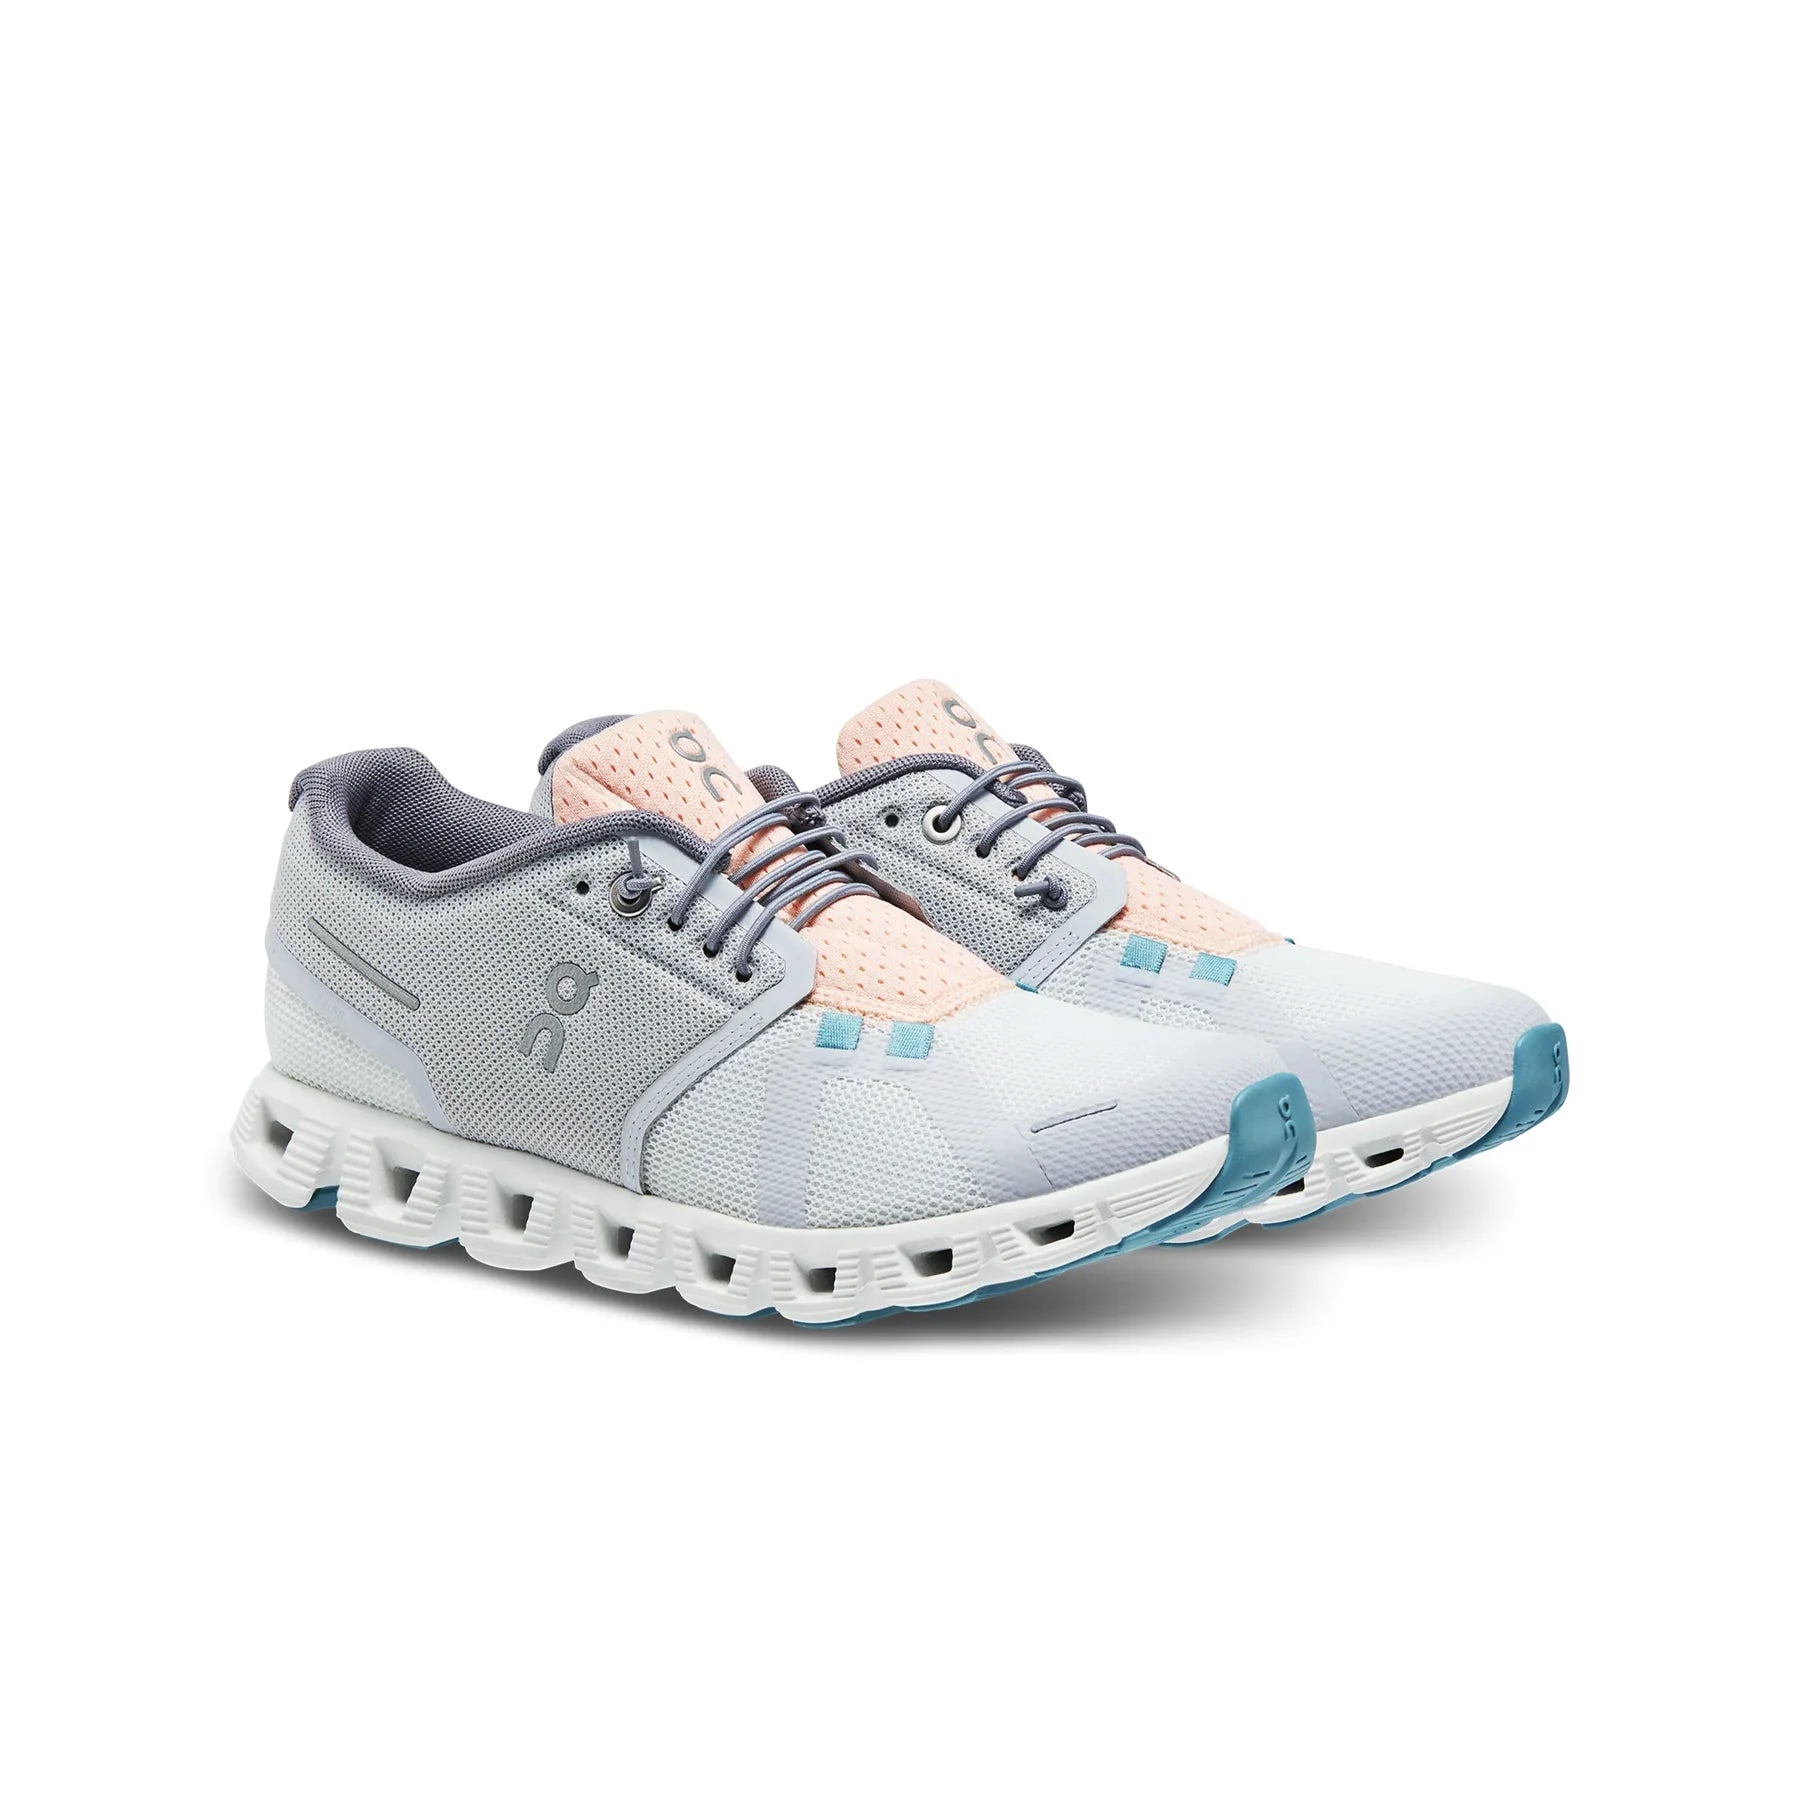 Front angled view of the pair of Women's ON Cloud 5 Push shoes in the color Glacier/Undyed White